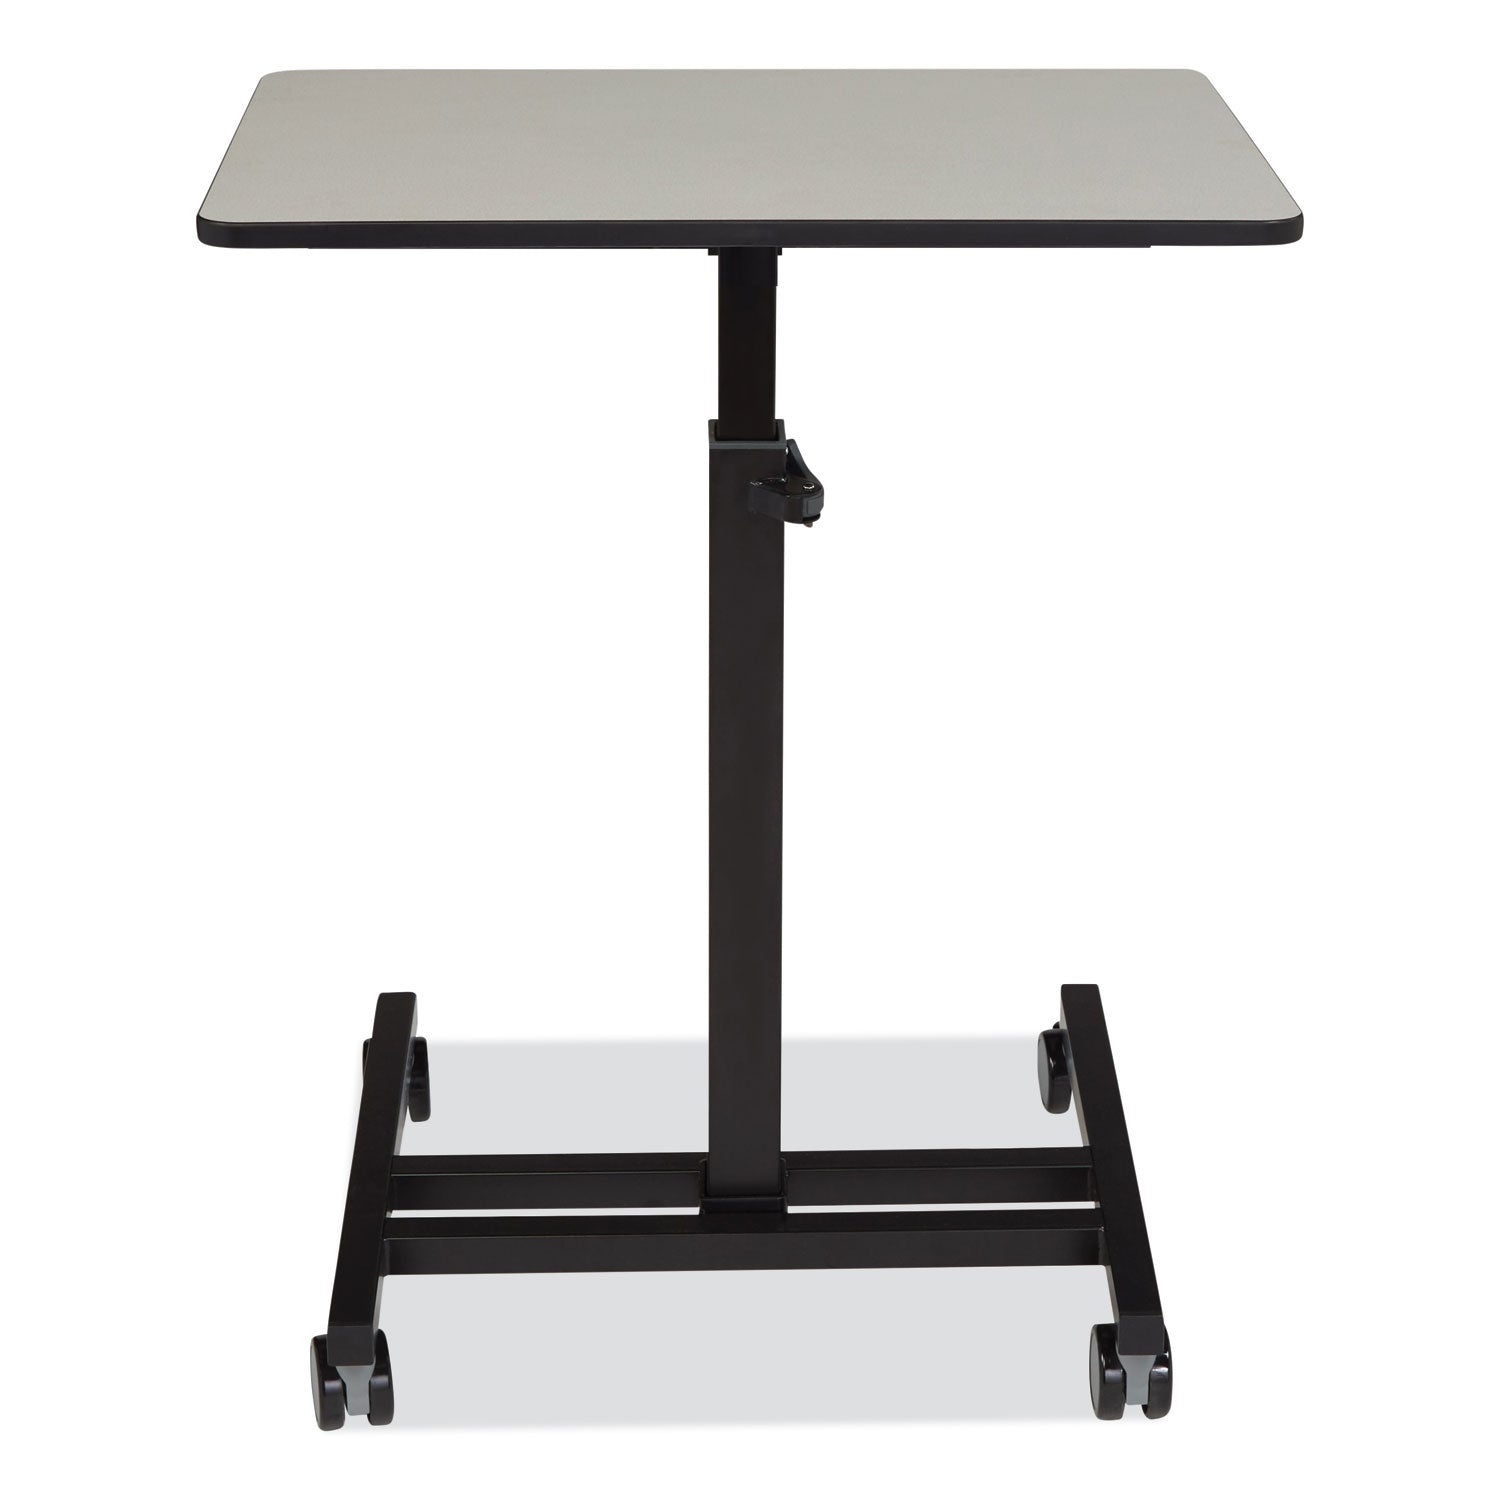 sit-stand-students-desk-2075-x-26-x-2775-to-445-gray-nebula-ships-in-1-3-business-days_npsedtc - 2